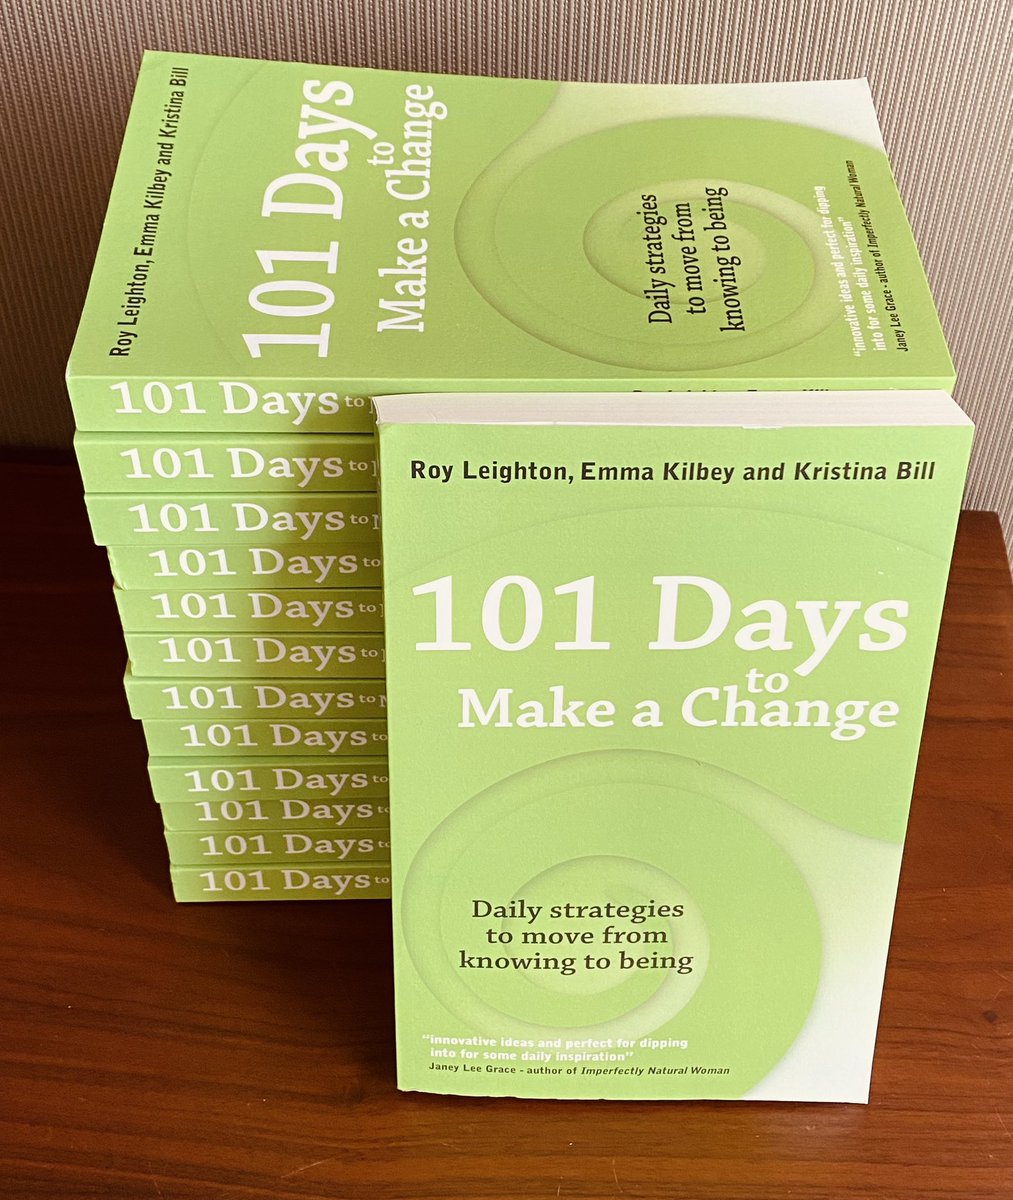 If you want to be the change you want to see in the world, it helps if you have a hand book. I’ve brought copies of #101DaysToMakeAChange for the #peacescholars and #peaceeducators from #kazakhstan I’m meeting with today. @CrownHousePub  @ITLWorldwide @EmmaKilbey @kristinabill